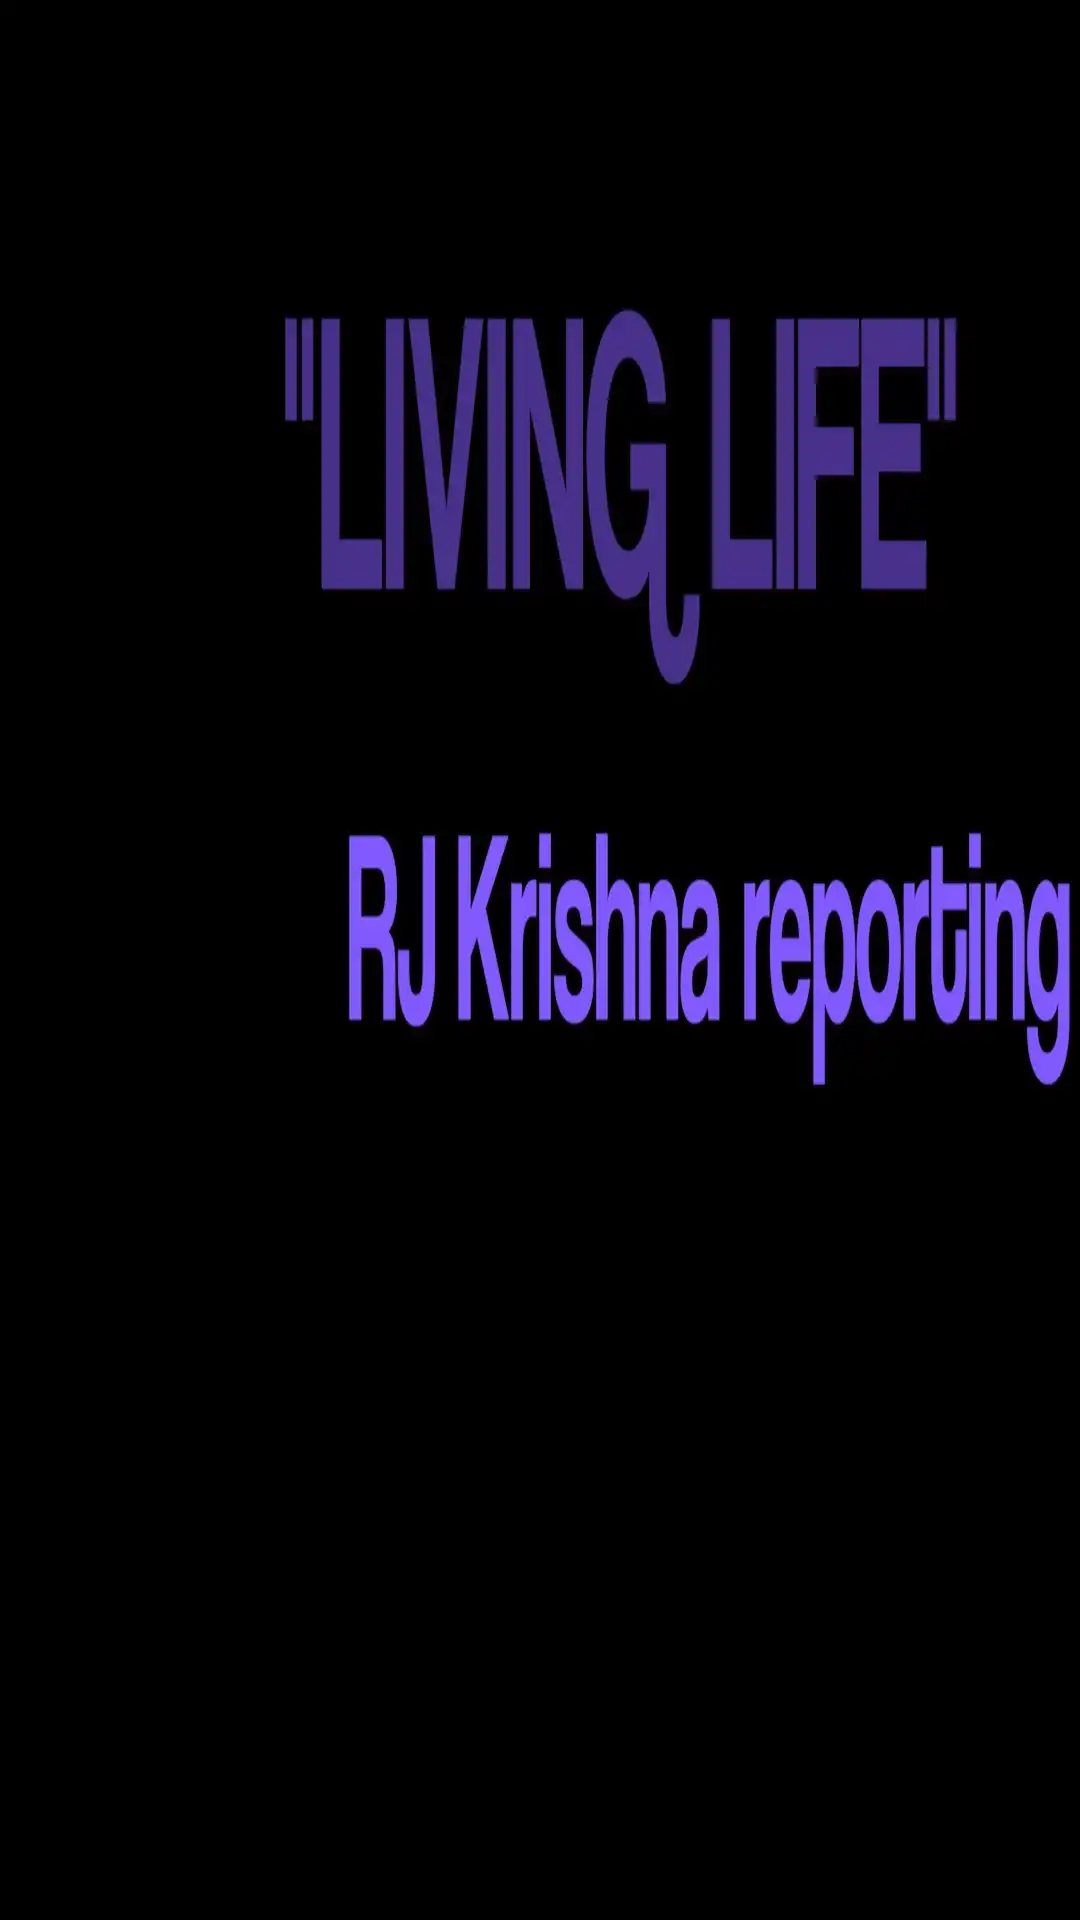 Living Life India  Its Oldest Cemetery-Krishna Reporting